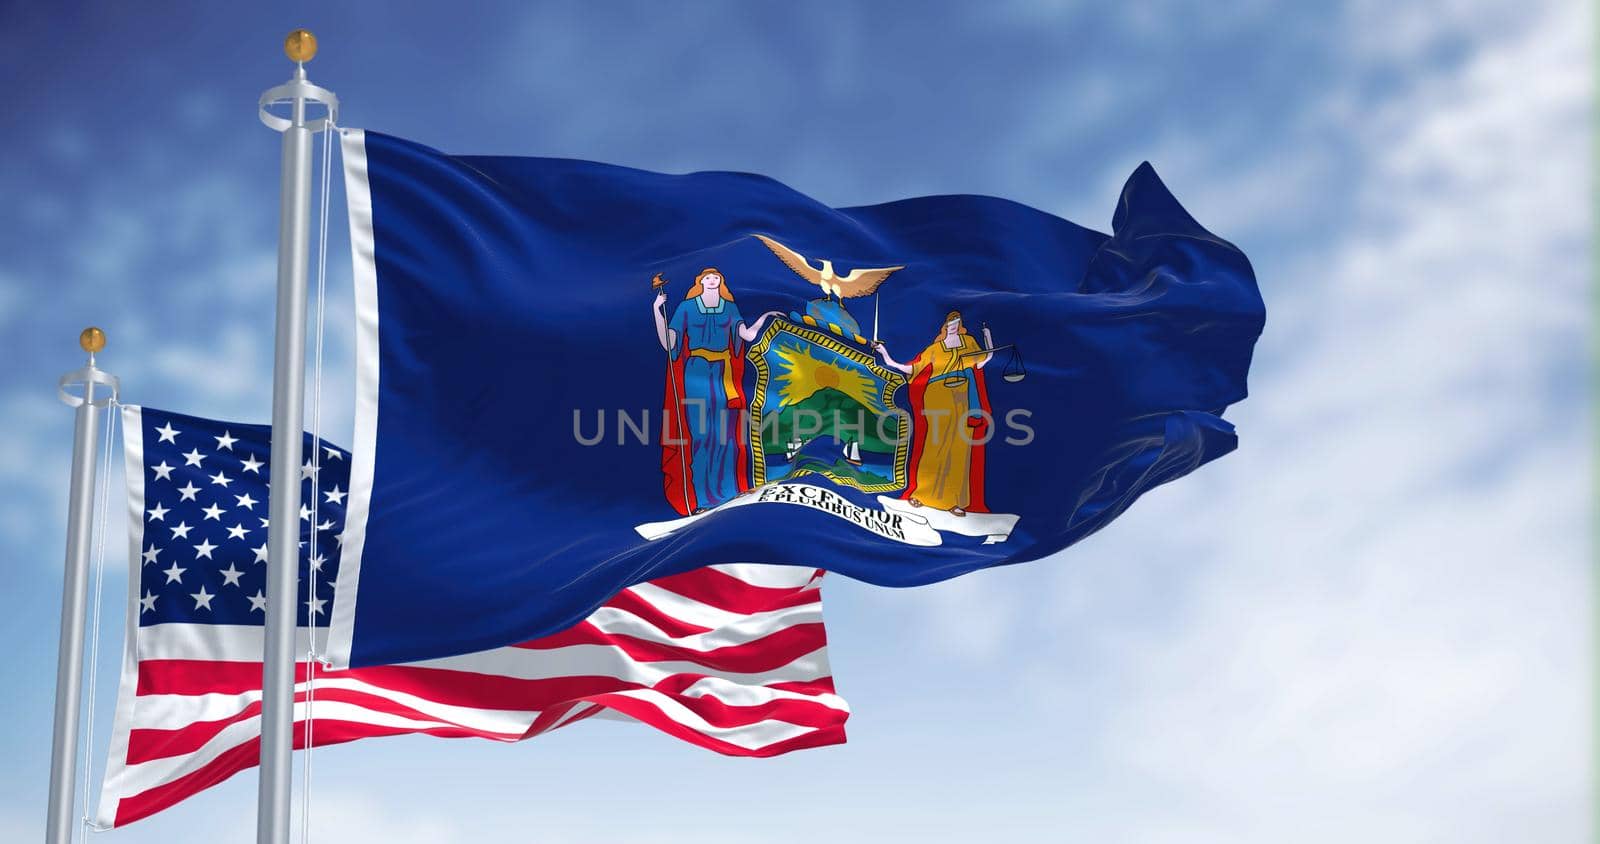 The New York state flag waving along with the national flag of the United States of America. In the background there is a clear sky. New York is a state in the Northeastern United States